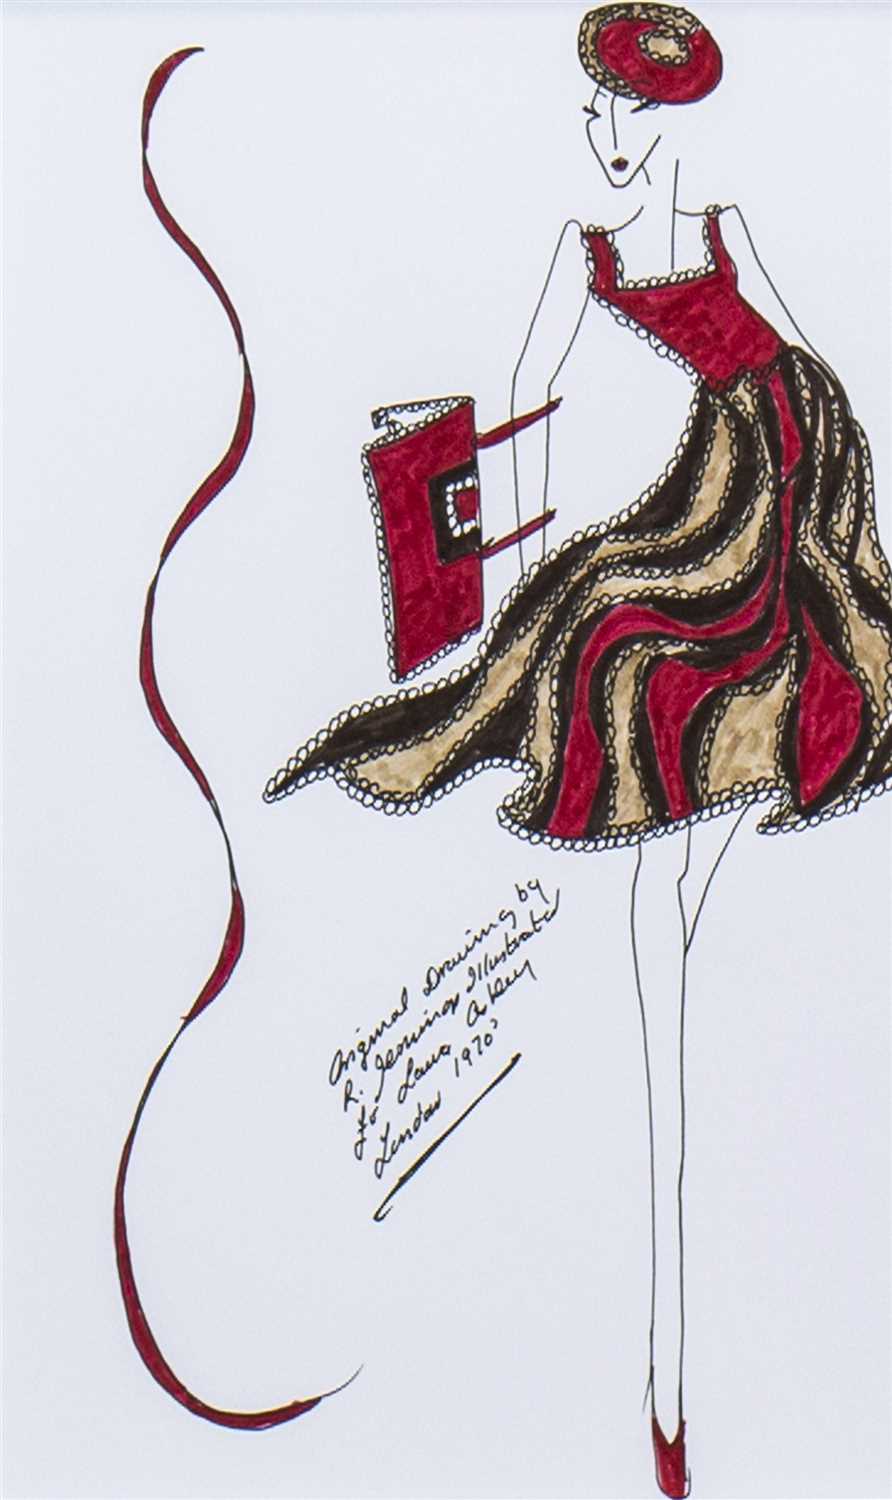 Lot 704 - AN ORIGINAL ILLUSTRATION OF DESIGNS FOR LAURA ASHLEY BY ROZ JENNINGS